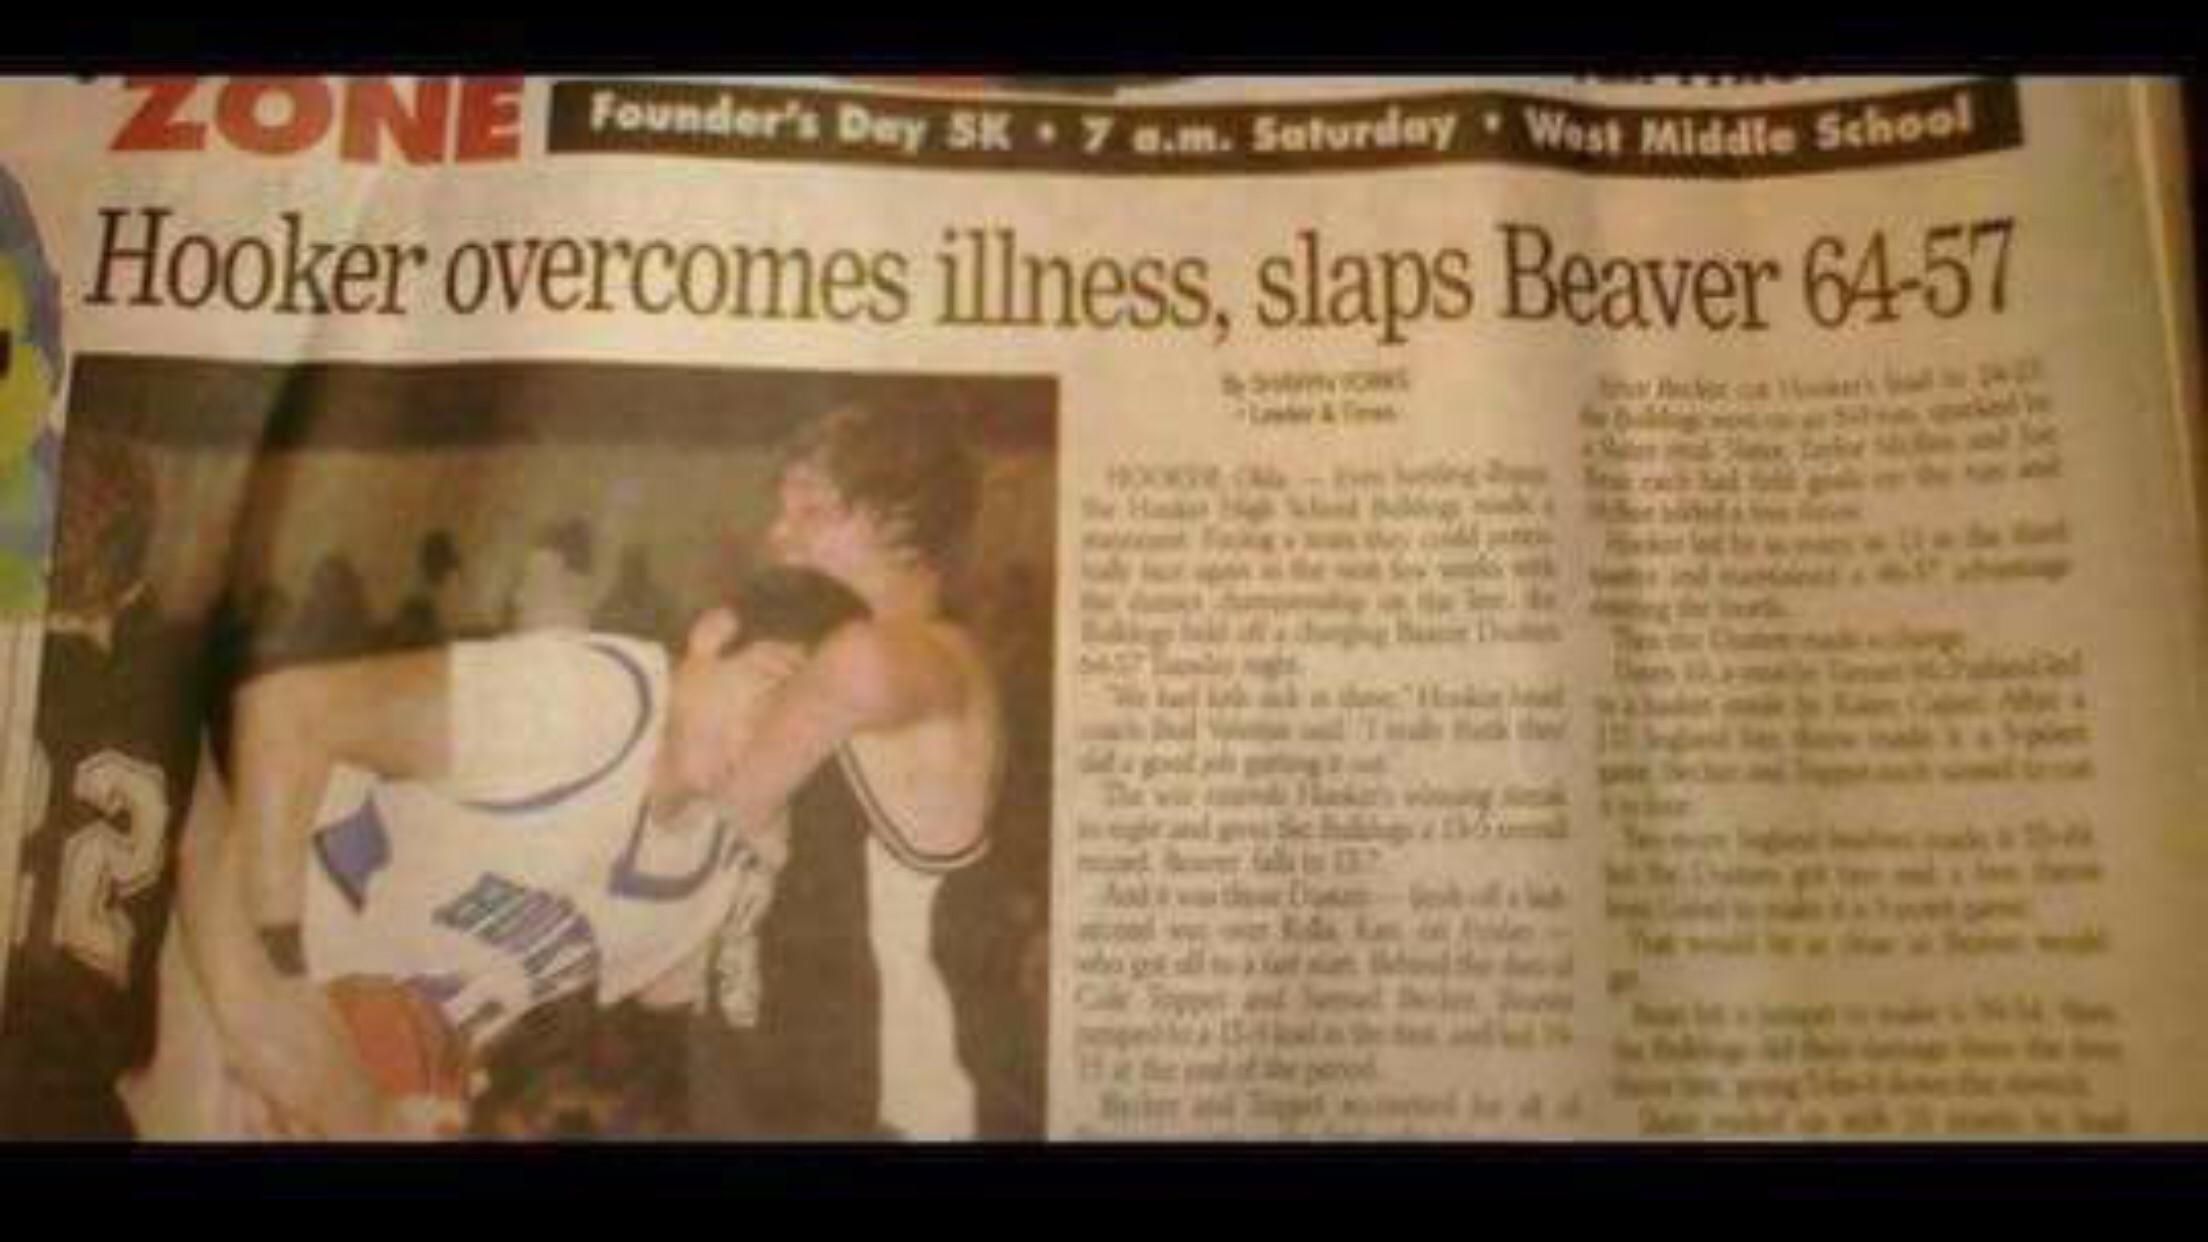 So I live near a town named Hooker and another named Beaver. They play each other in HS sports.